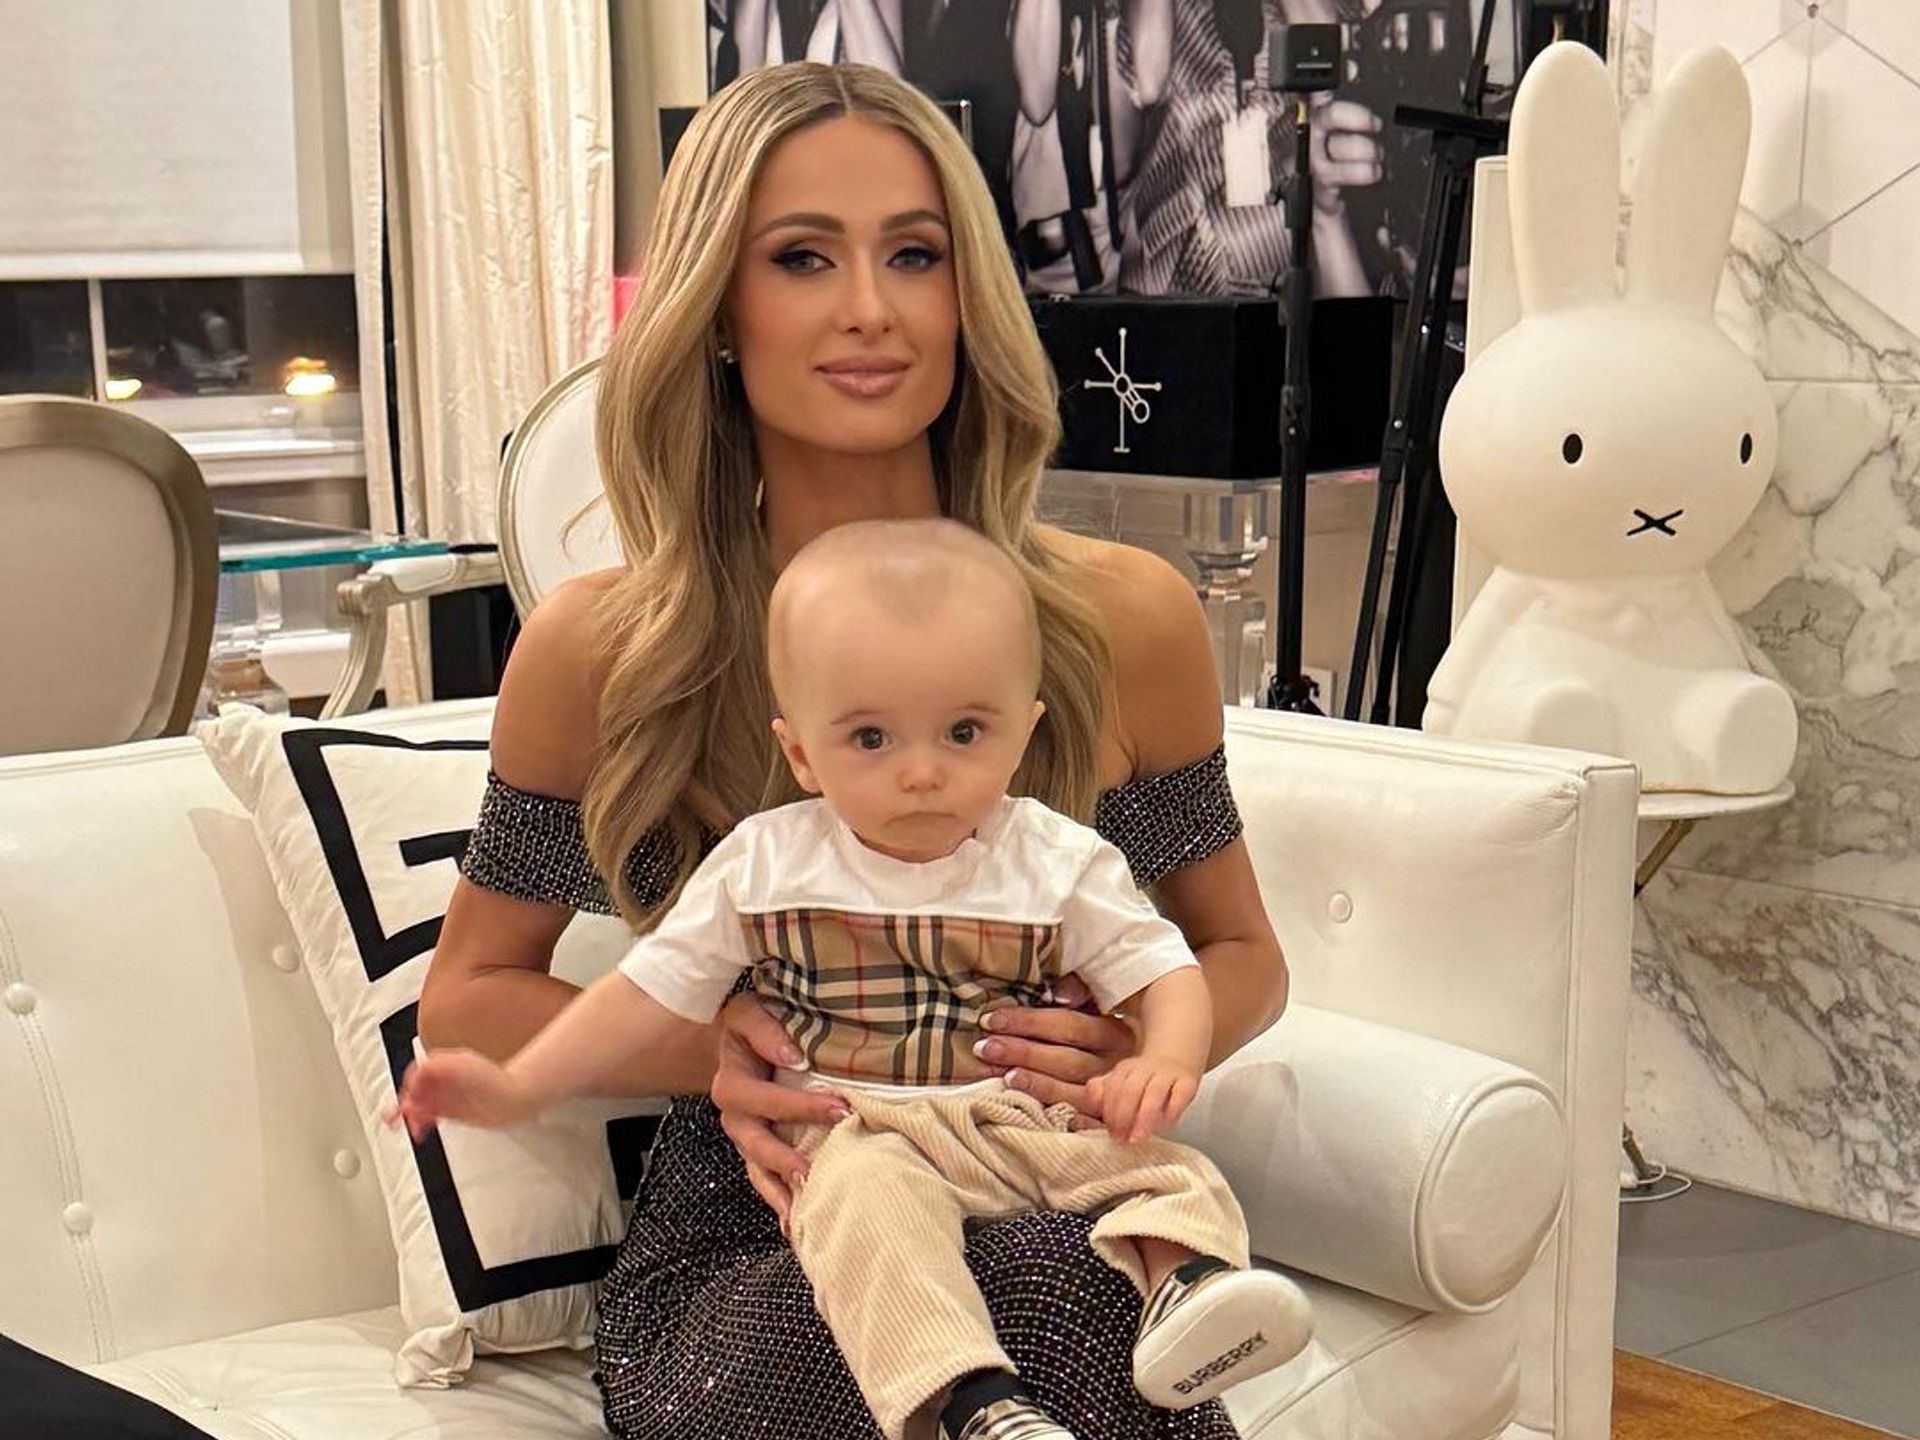 Paris Hilton shares emotional unseen footage of baby son Phoenix's birth  after 'sick' comments about his appearance | HELLO!